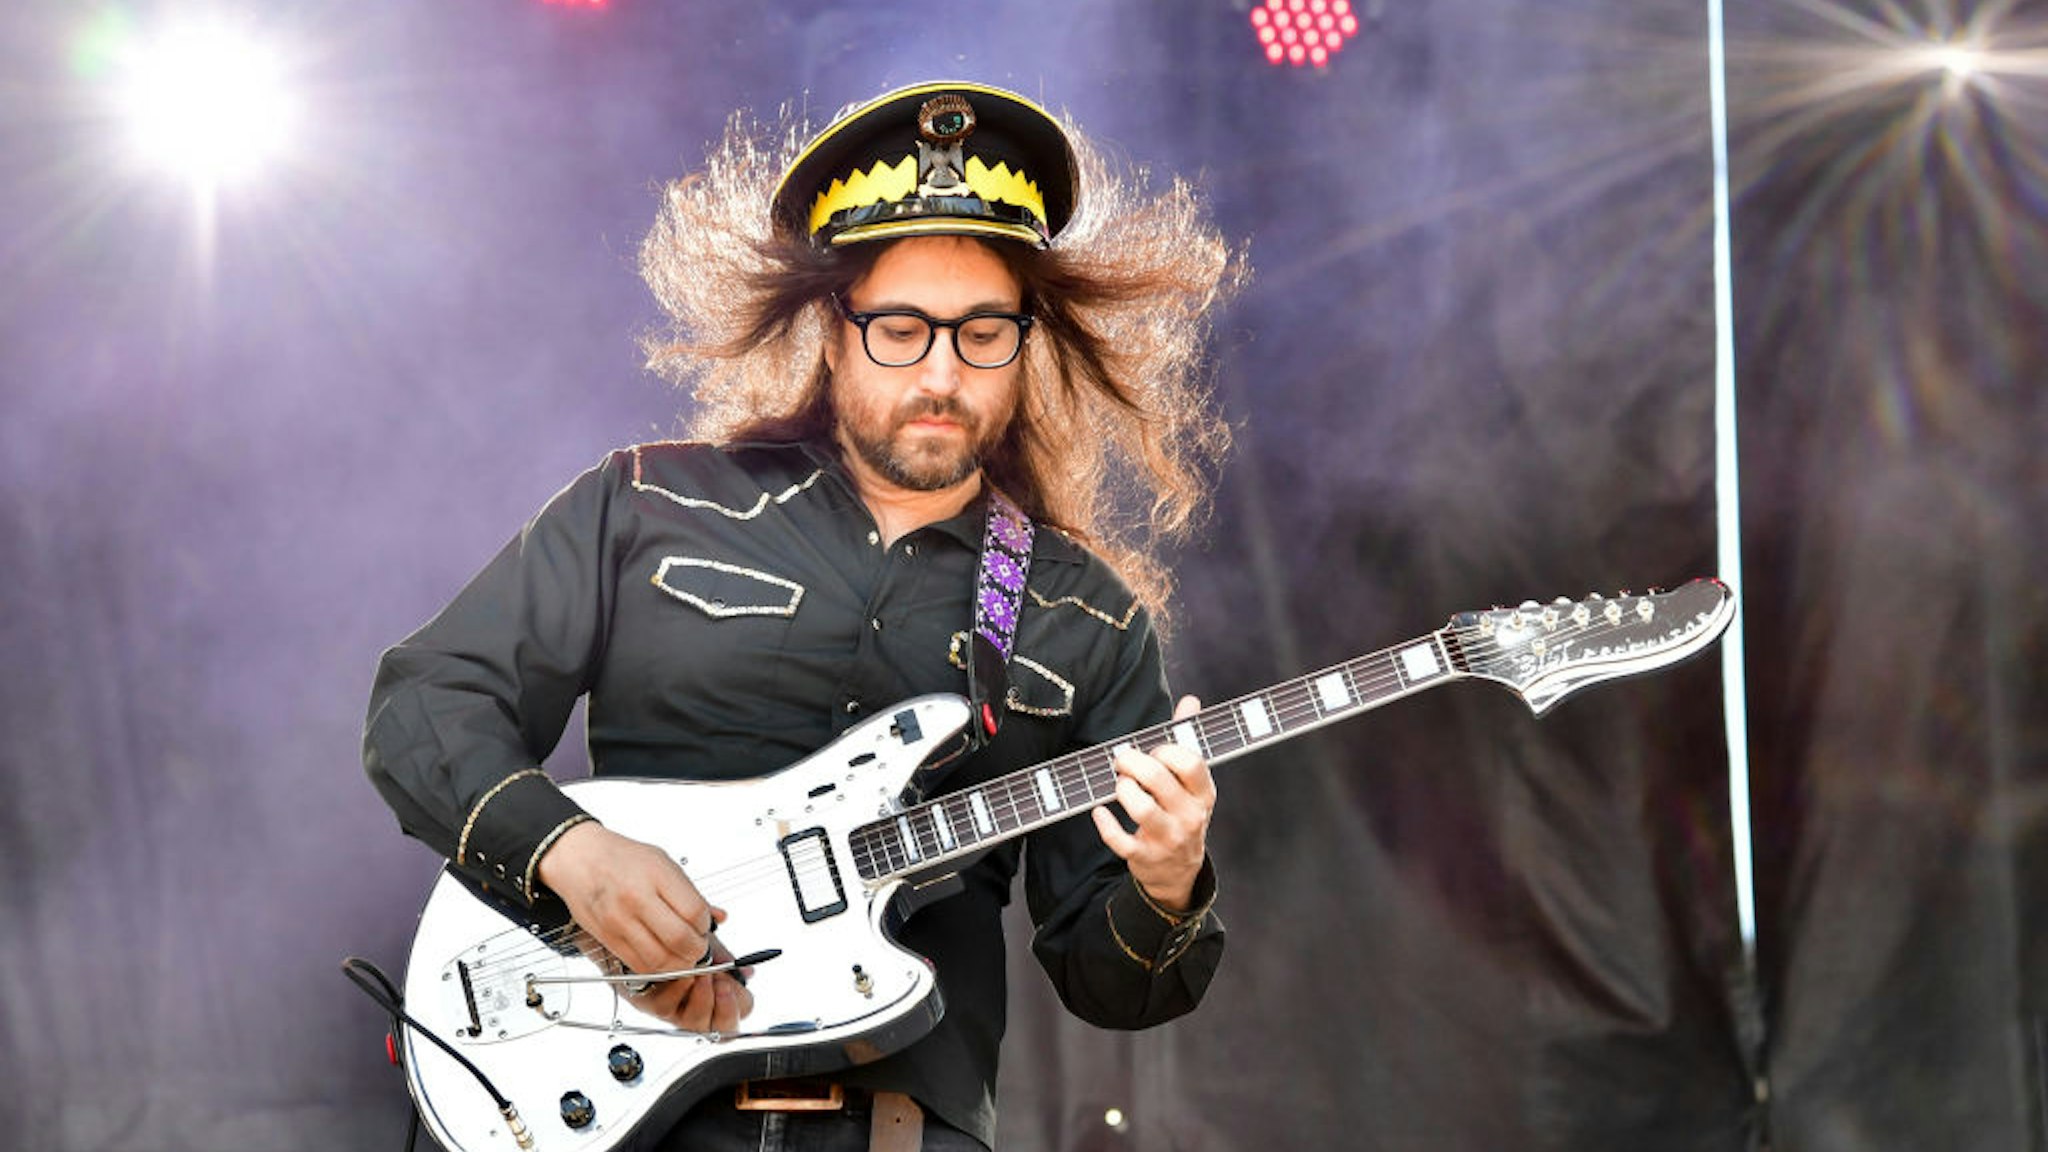 Sean Lennon performs during 2019 Sweetwater 420 Festival at Centennial Olympic Park on April 21, 2019 in Atlanta, Georgia.